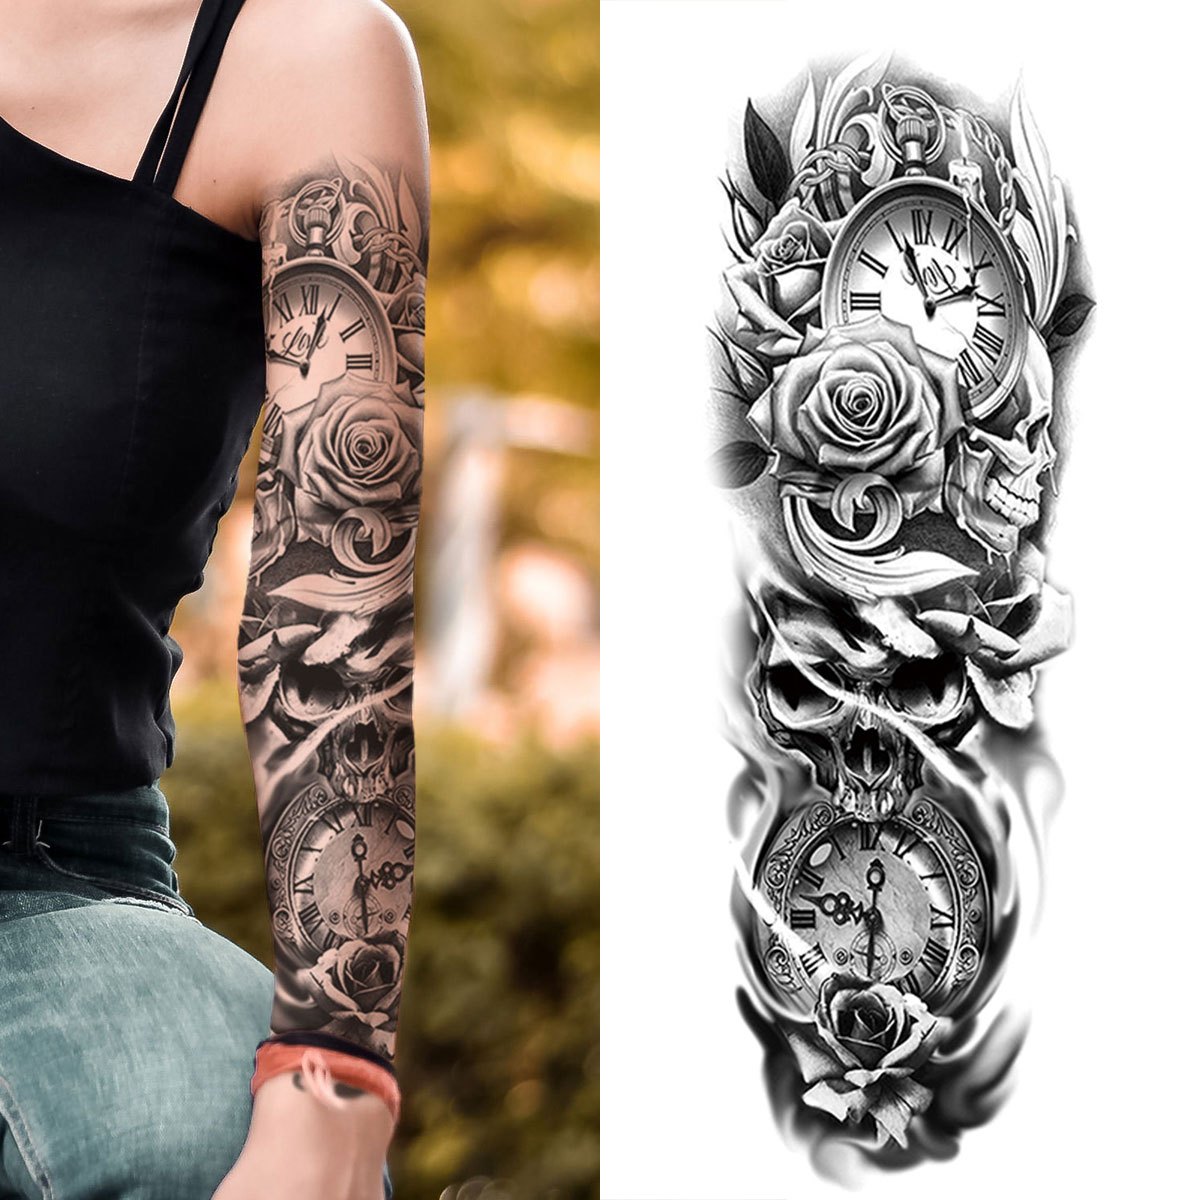 Arm Tattoos Photos Download The BEST Free Arm Tattoos Stock Photos  HD  Images